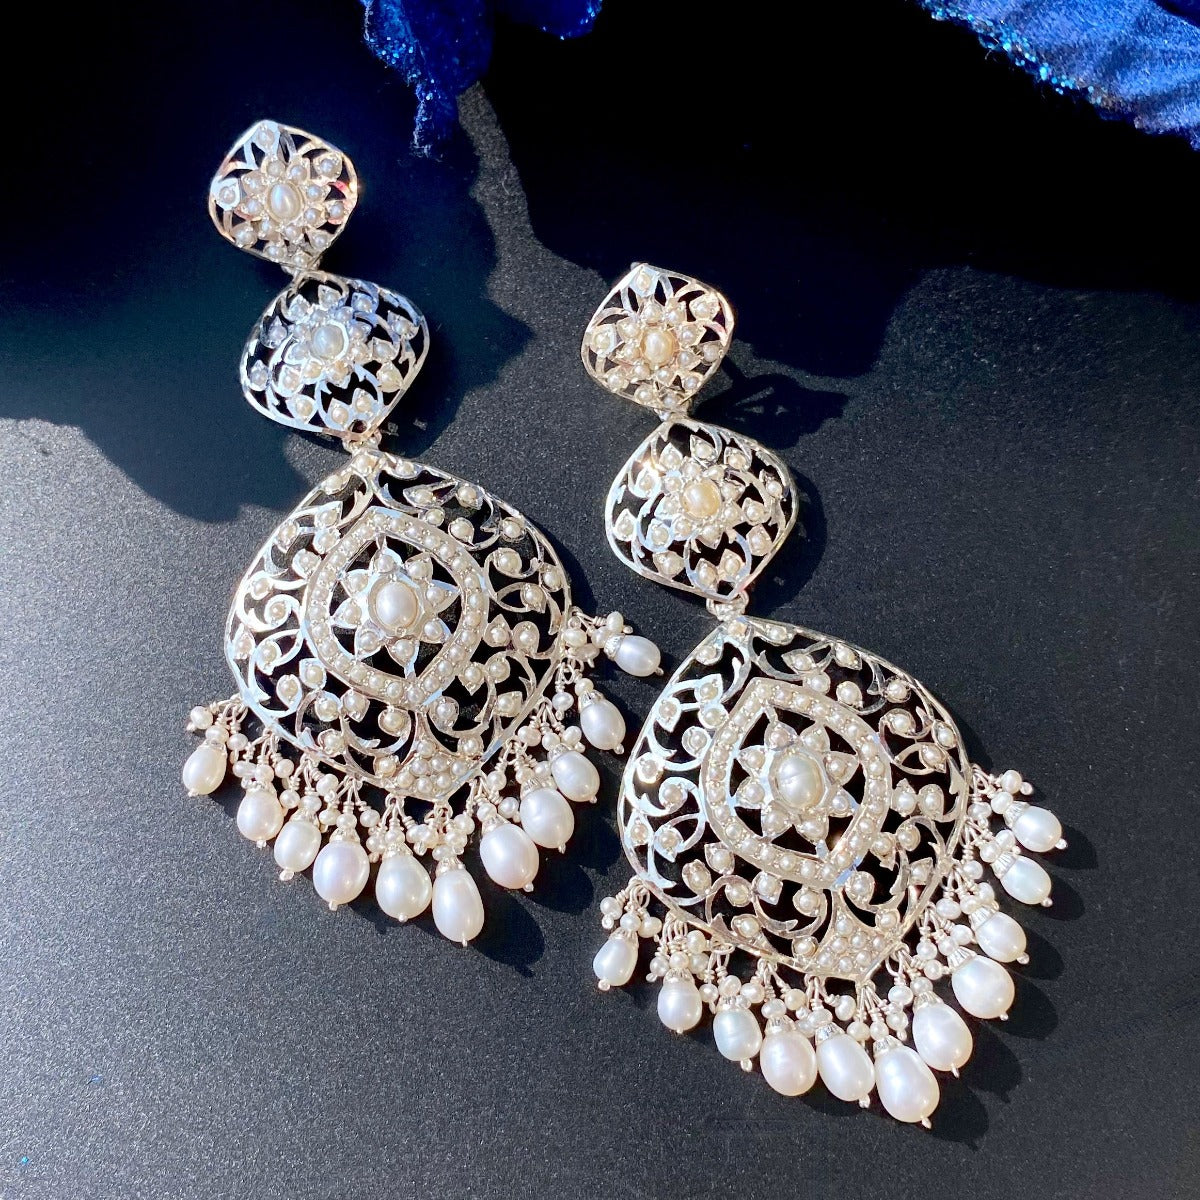 Statement Edwardian Earrings | Inspired From Edwardian Victorian Era | Indian Touch